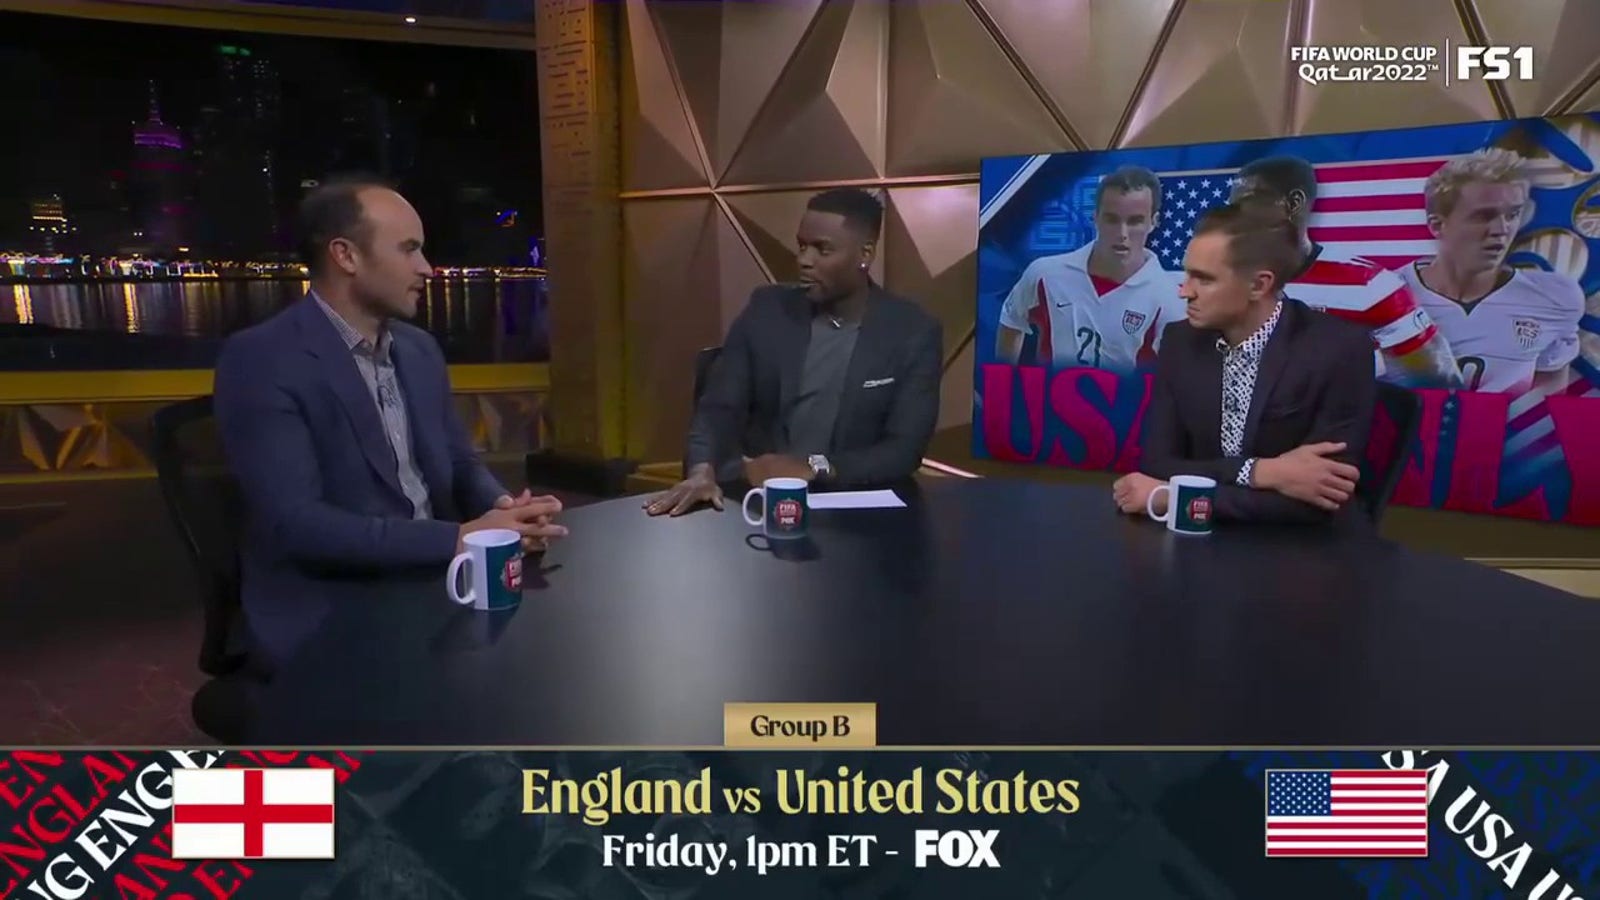 England vs. United States Preview: What is the USMNT's best game plan?